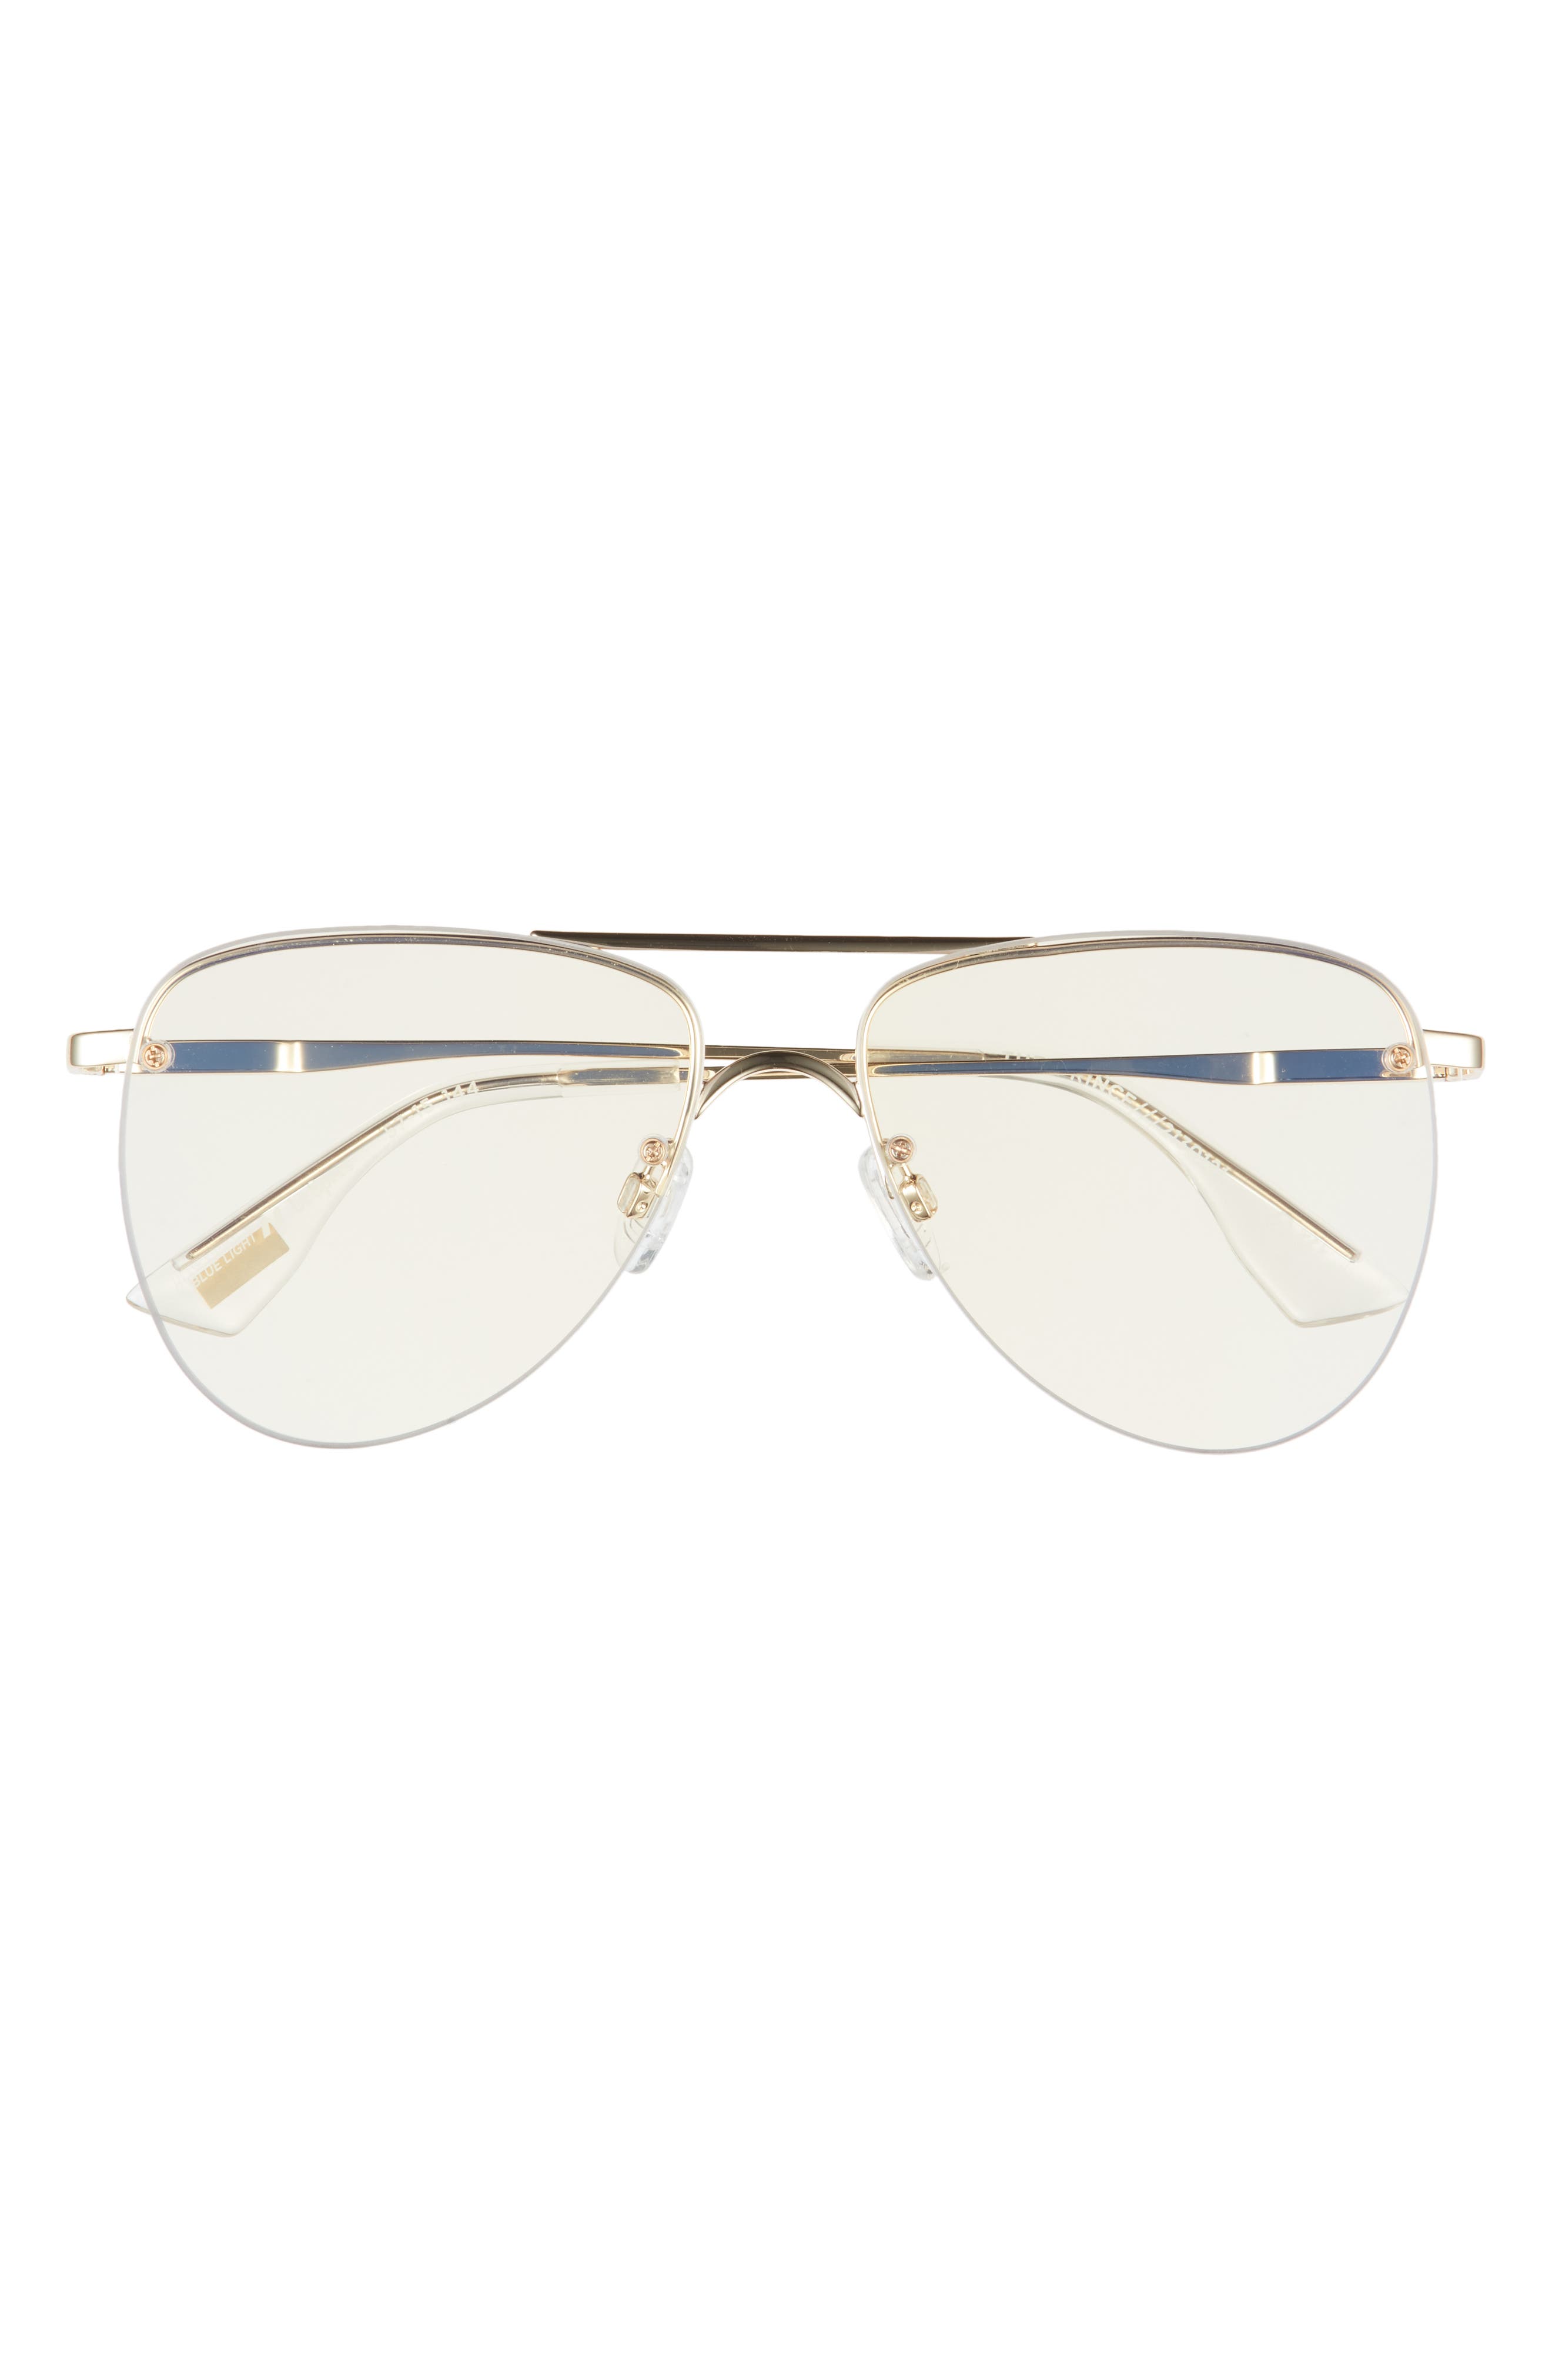 Le Specs The Prince 58mm Blue Light Blocking Glasses in Bright Gold/Anti Blue Light at Nordstrom